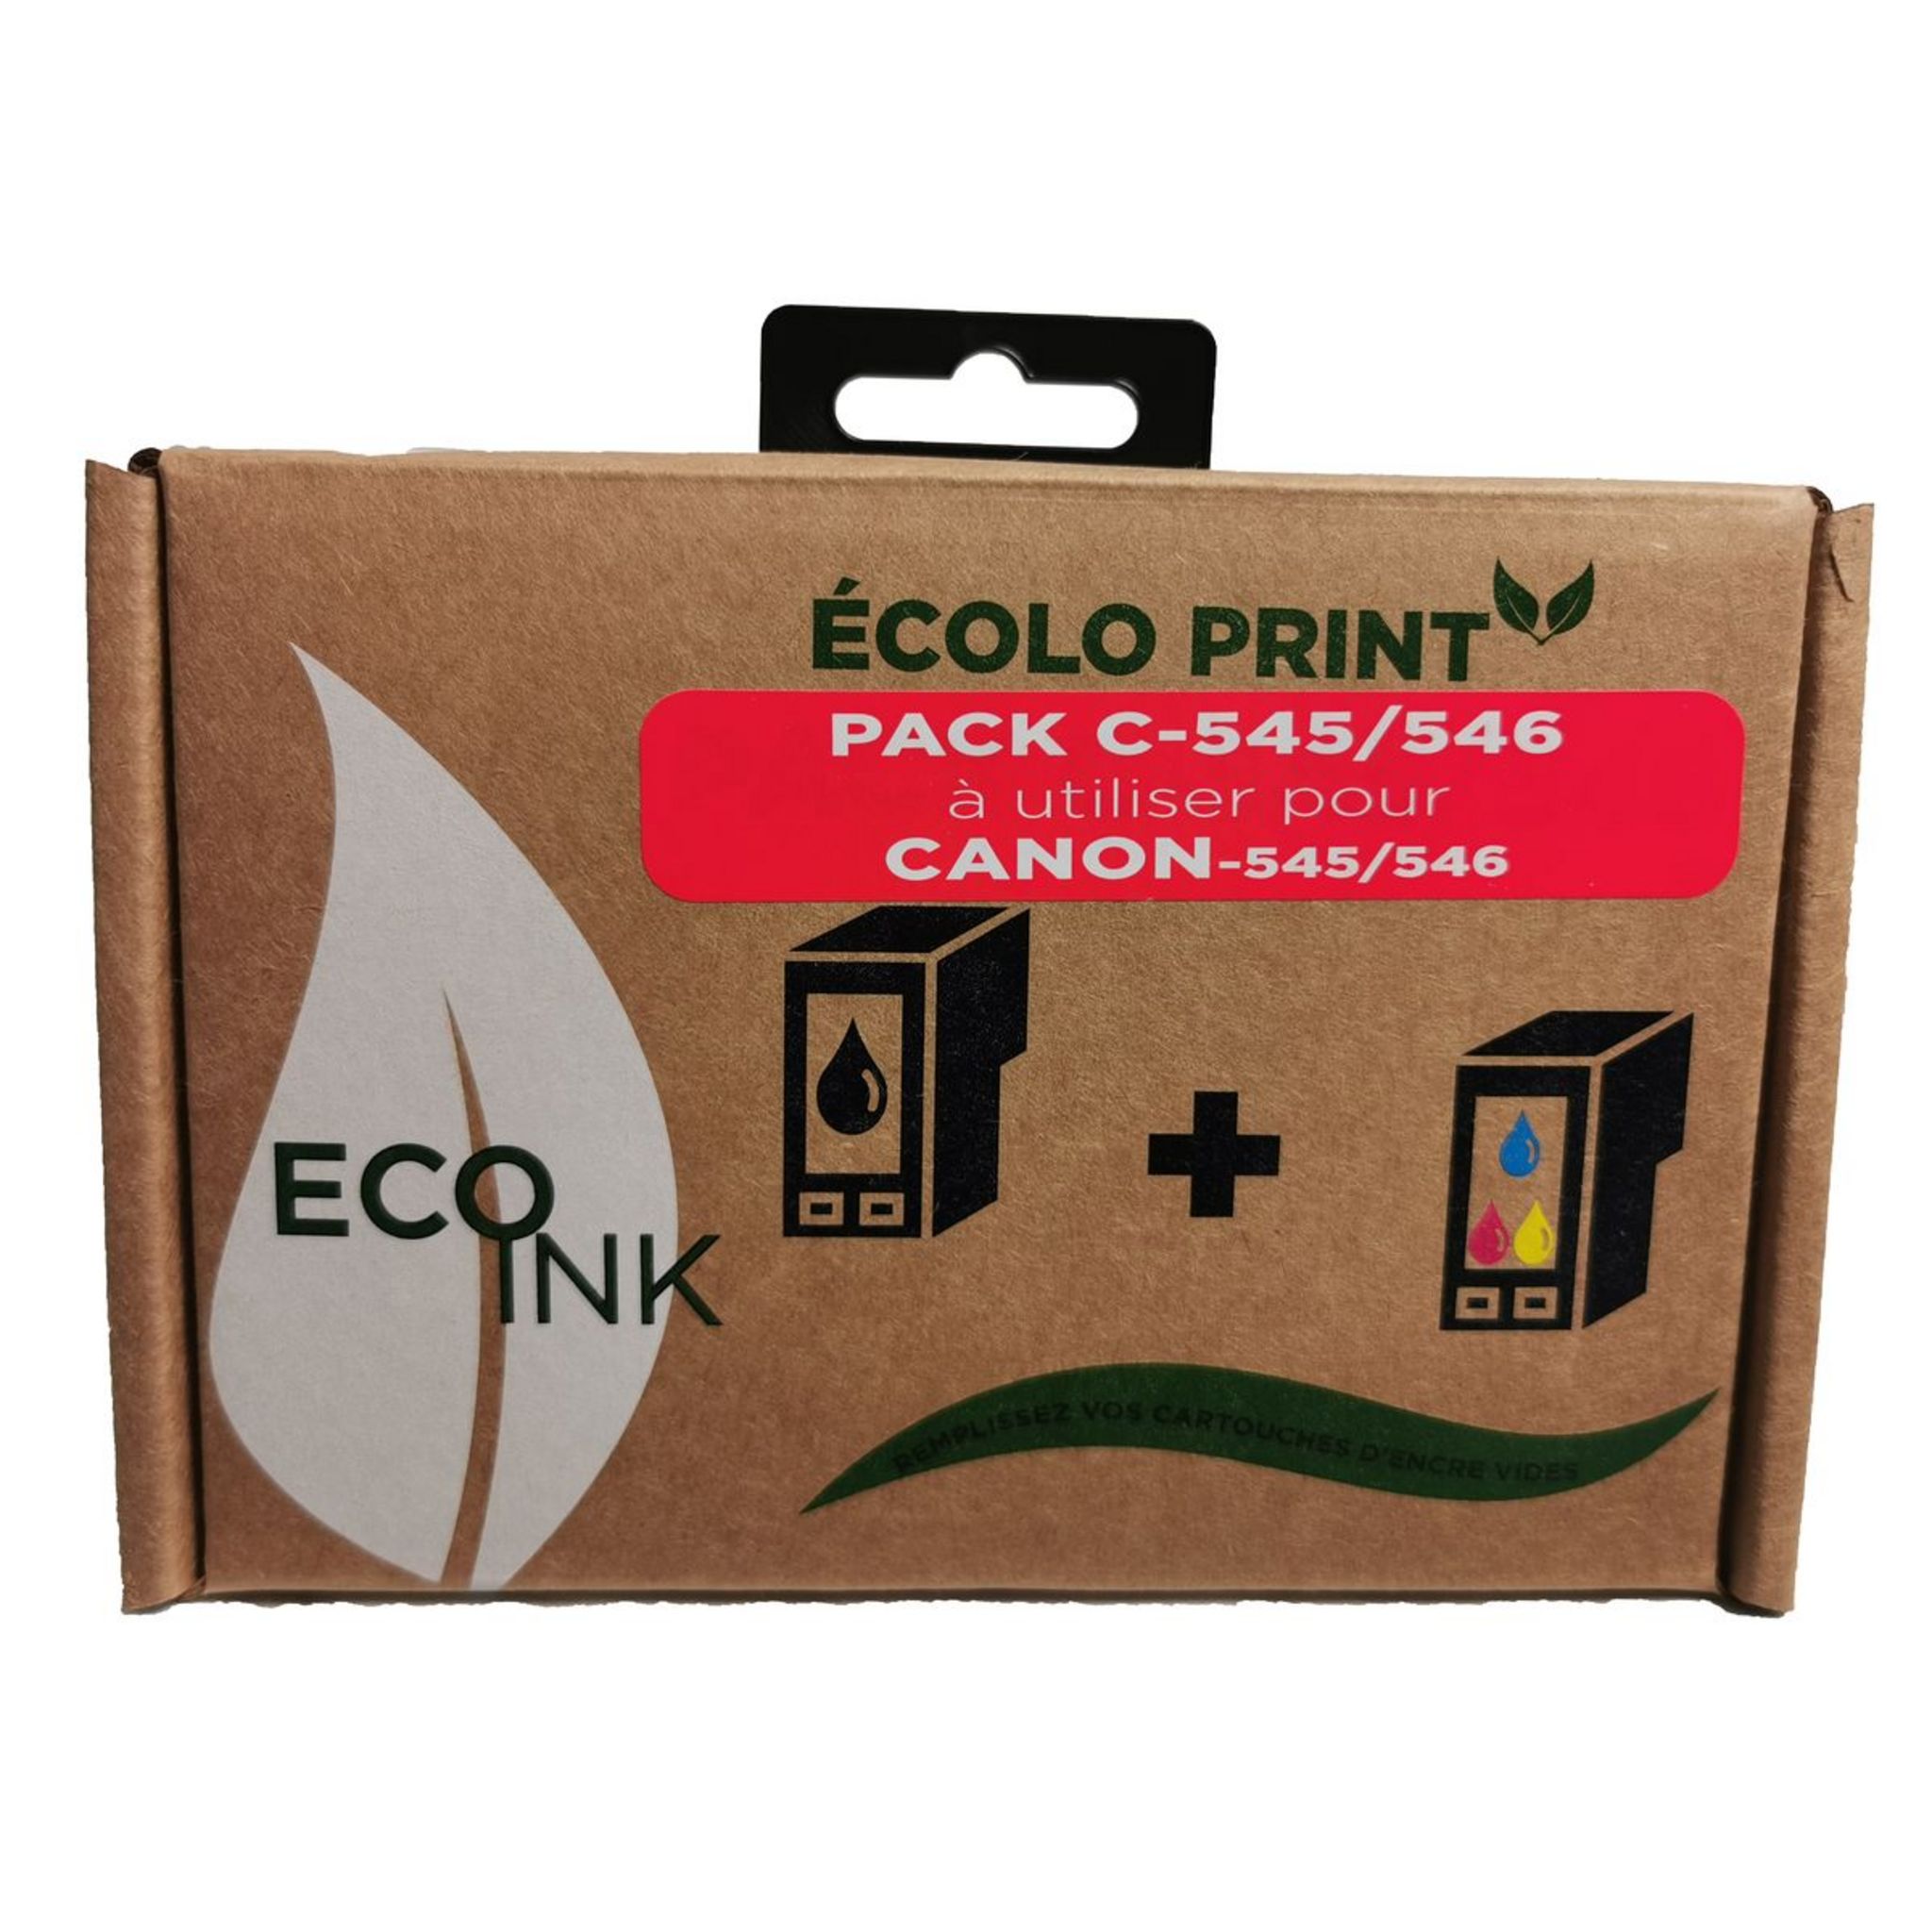 ECO INK Pack recharge cartouche Cj545/546 ECO pas cher 